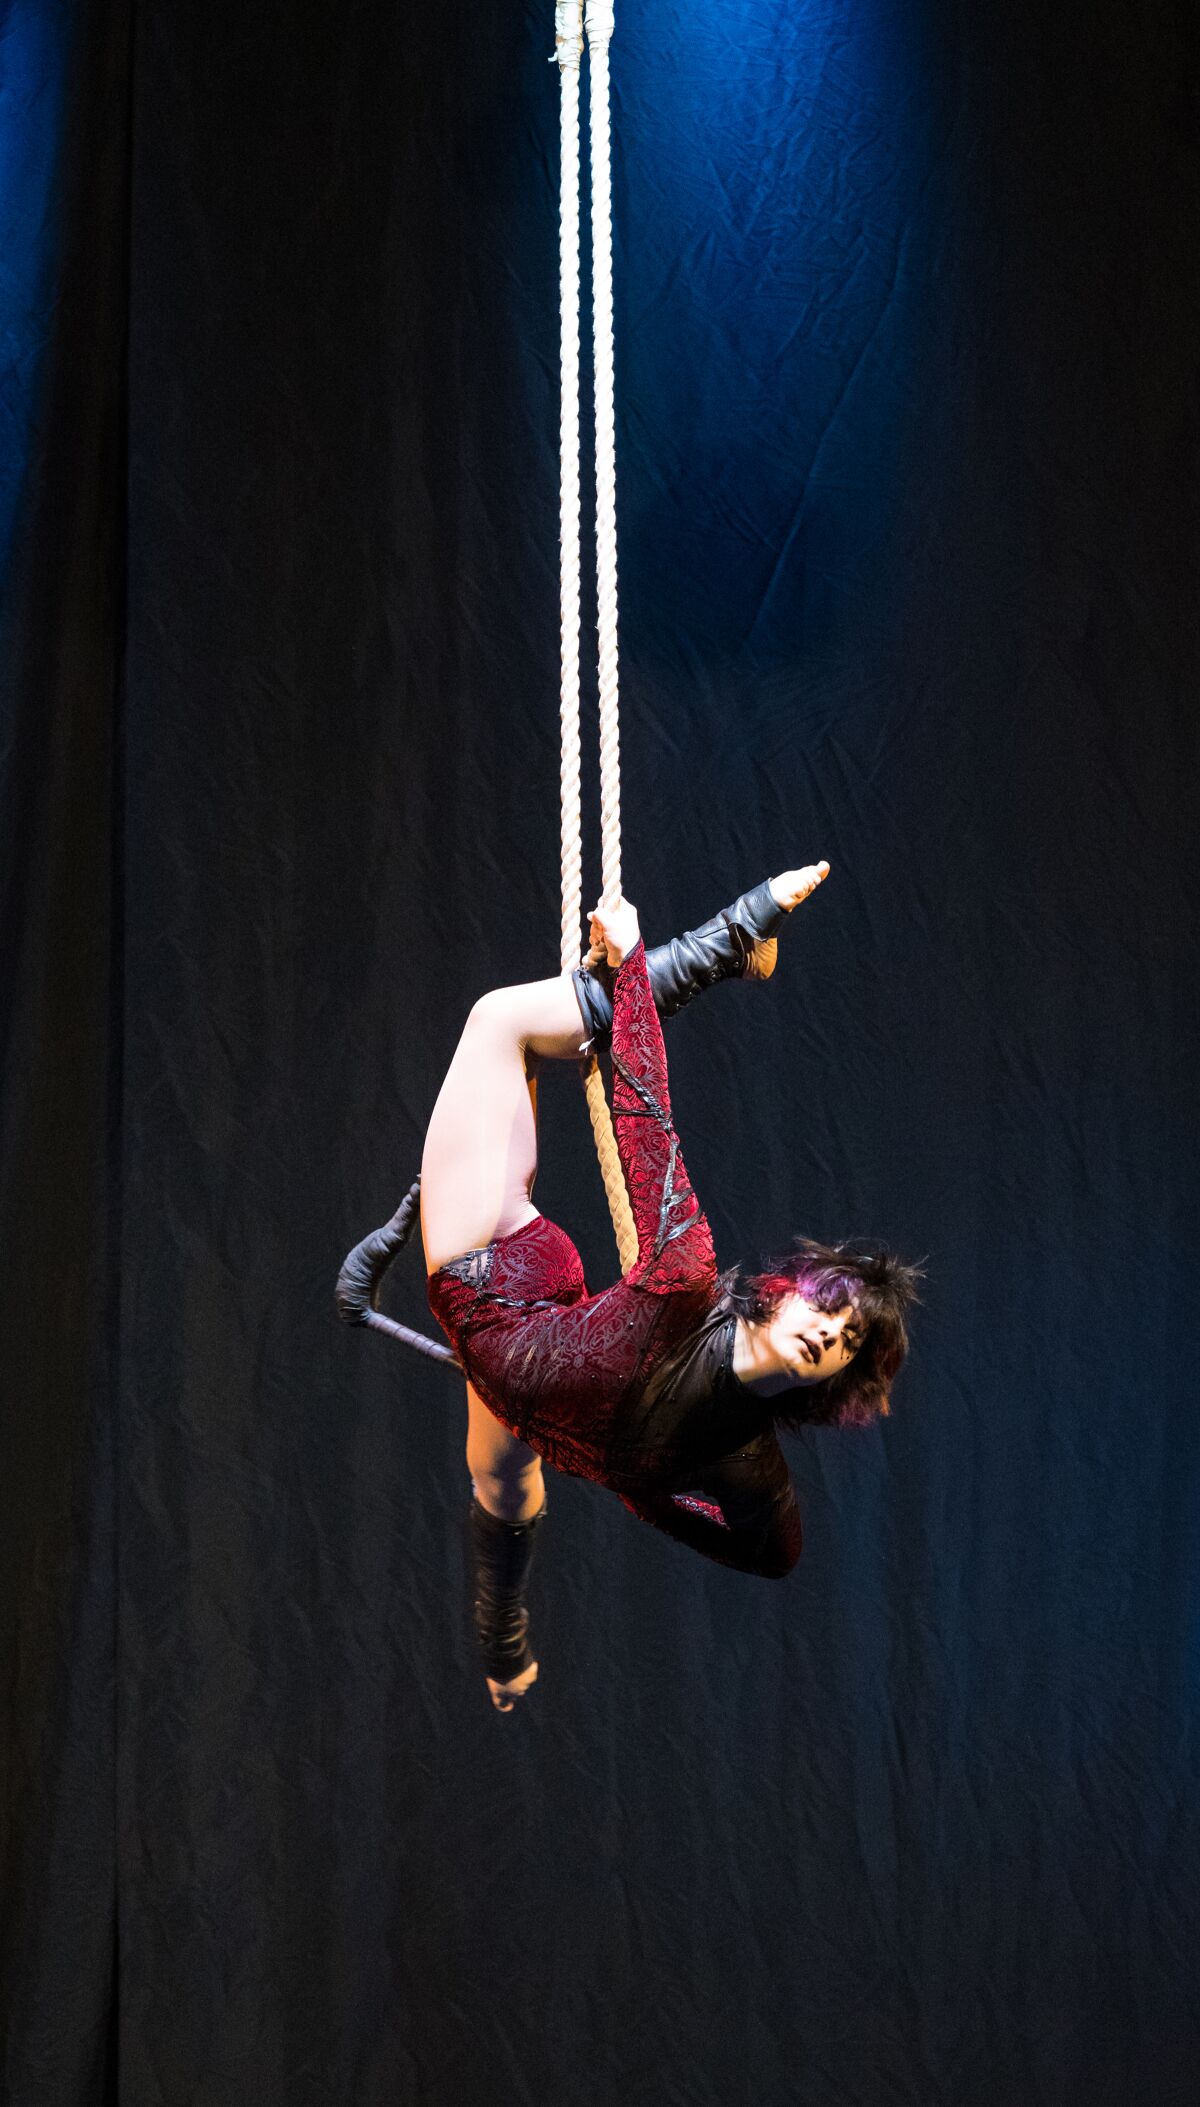 Malena Flores performing on the dance trapeze at the De Leon Cirque Fest in February.